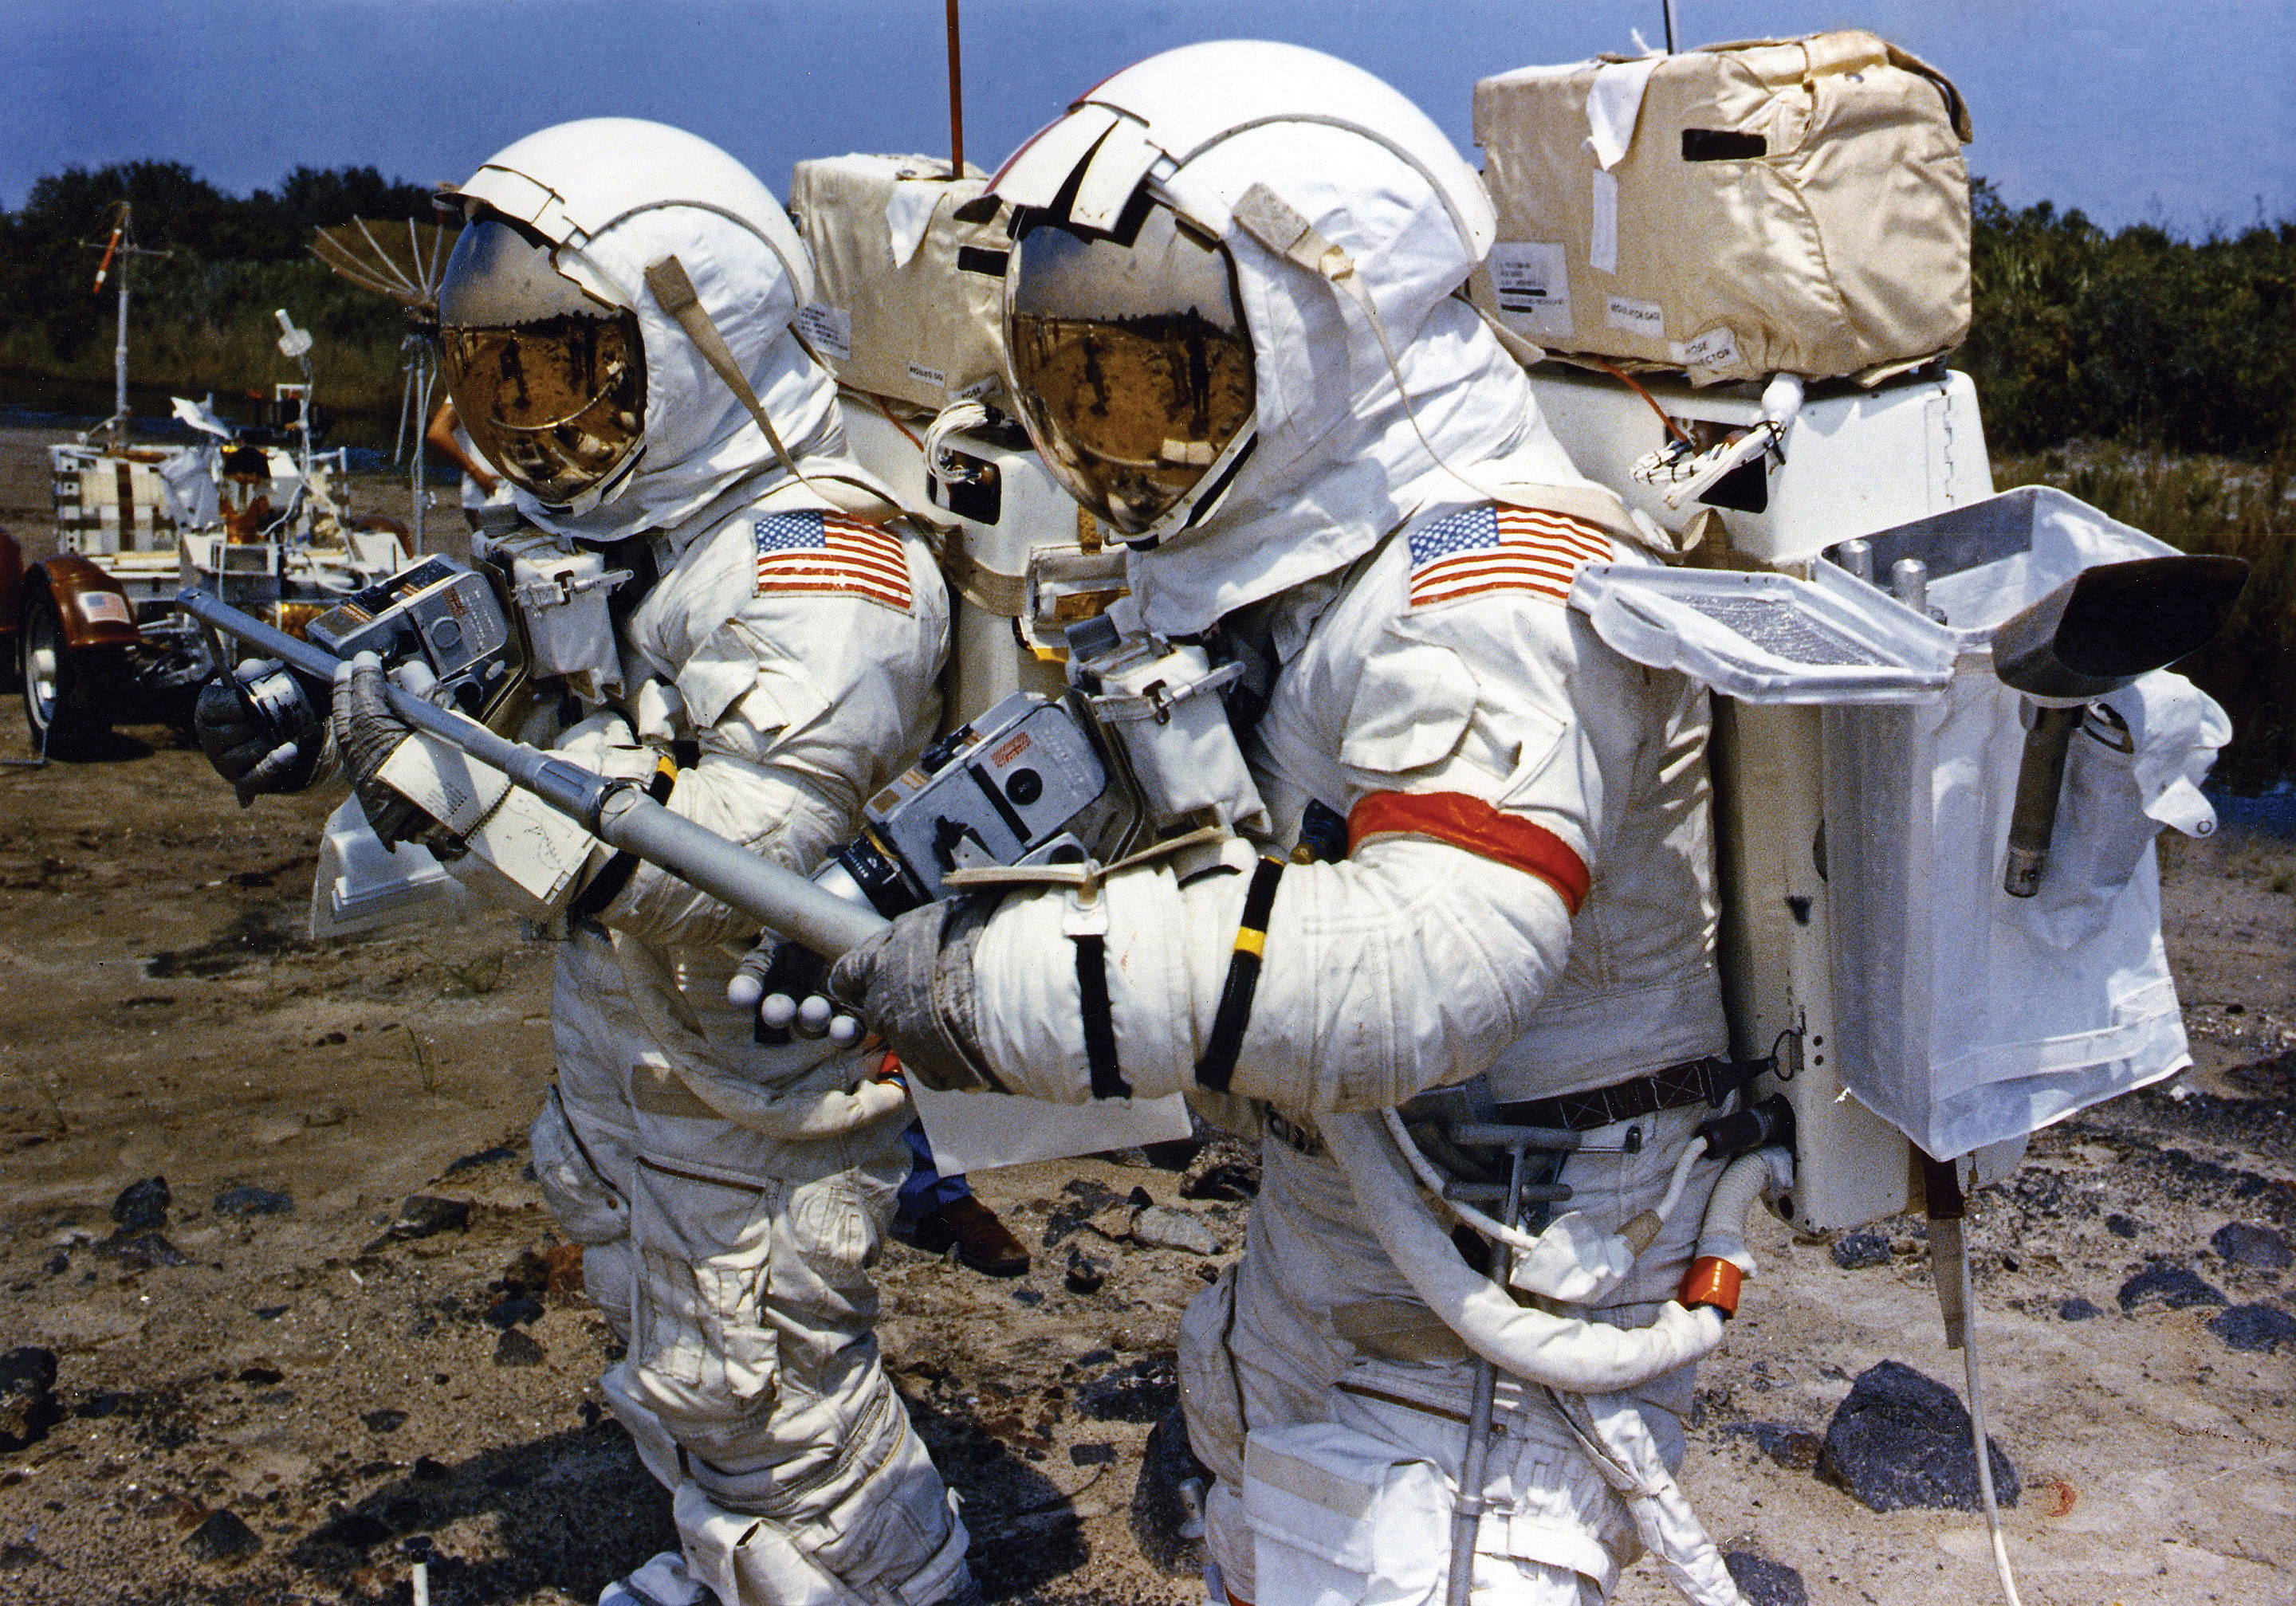 Apollo 17 crew members Gene Cernan and Harrison Schmitt work together during a lunar EVA simulation at Kennedy Space Center in Florida. They are the last humans to walk upon the surface of the Moon. Credit: NASA via J.L. Pickering/Retro Space Images